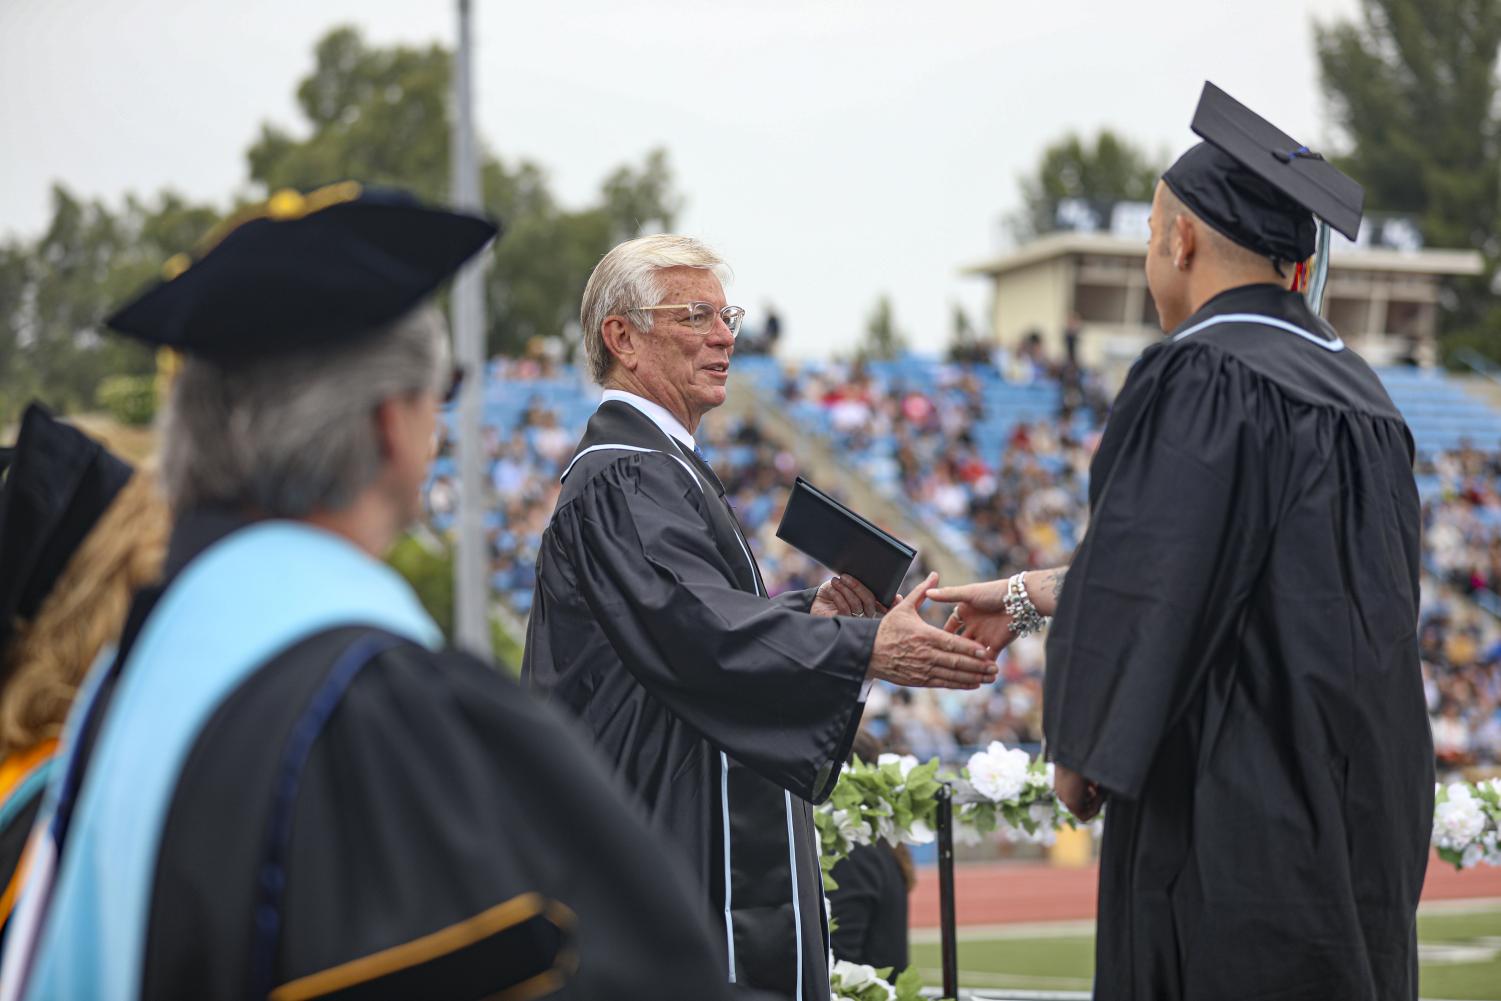 VCCCD Chair Bernardo Perez shakes hands with a graduating student on stage during the 2023 graduation ceremony on Friday, May 19, at Moorpark College.